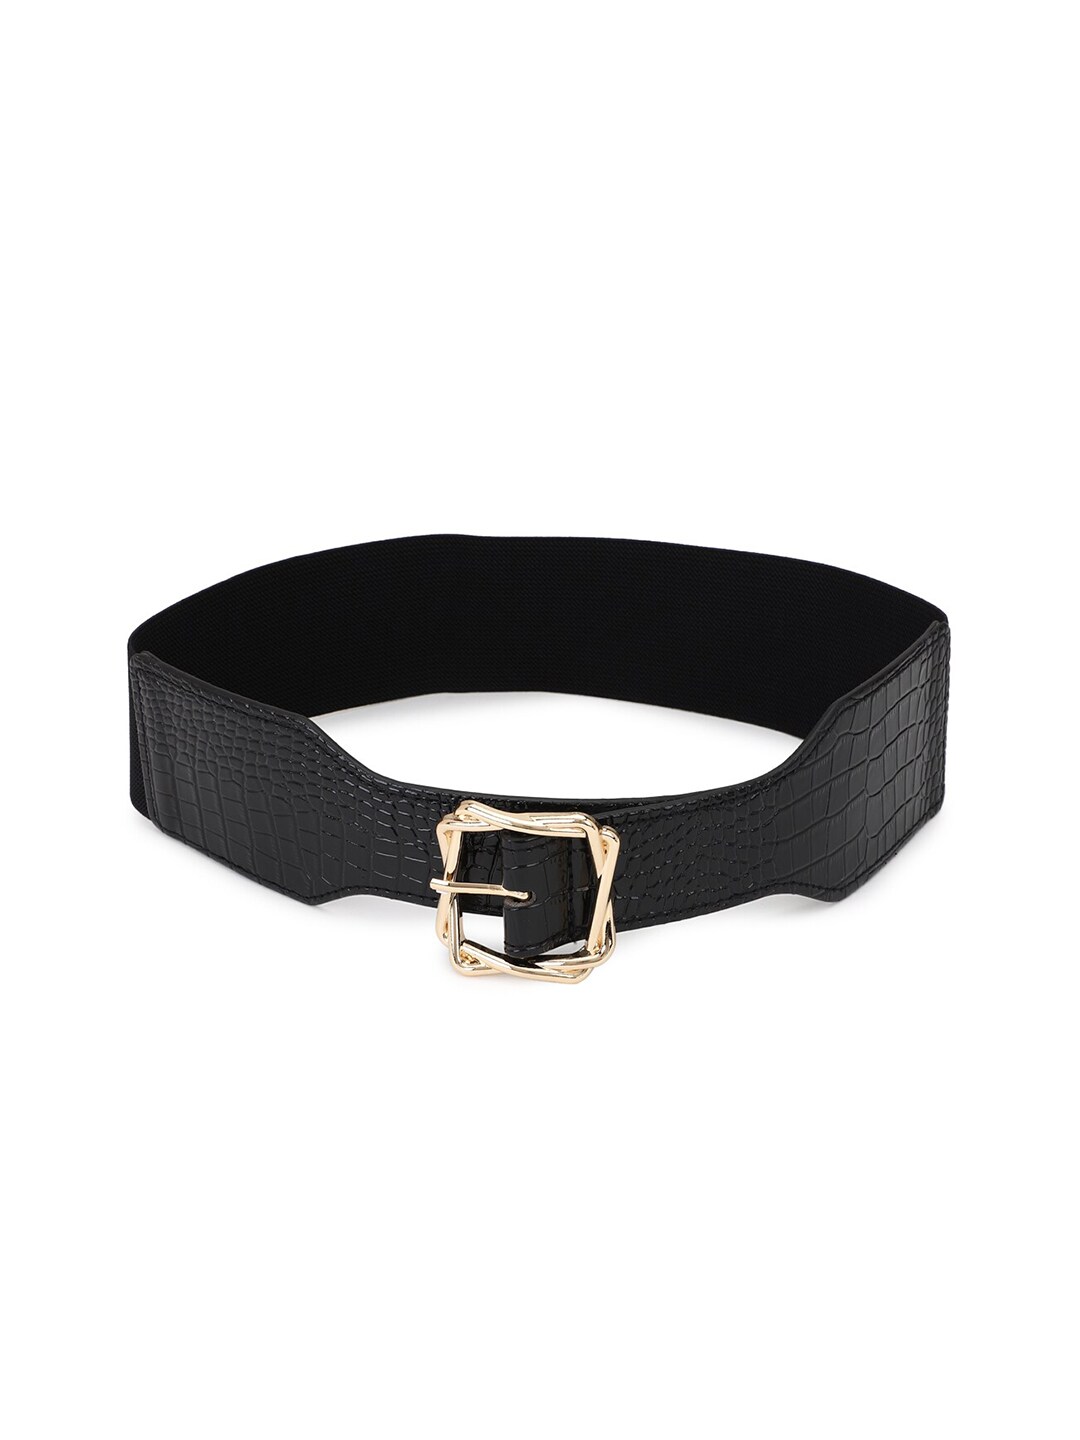 FOREVER 21 Women Black Textured PU Belt Price in India